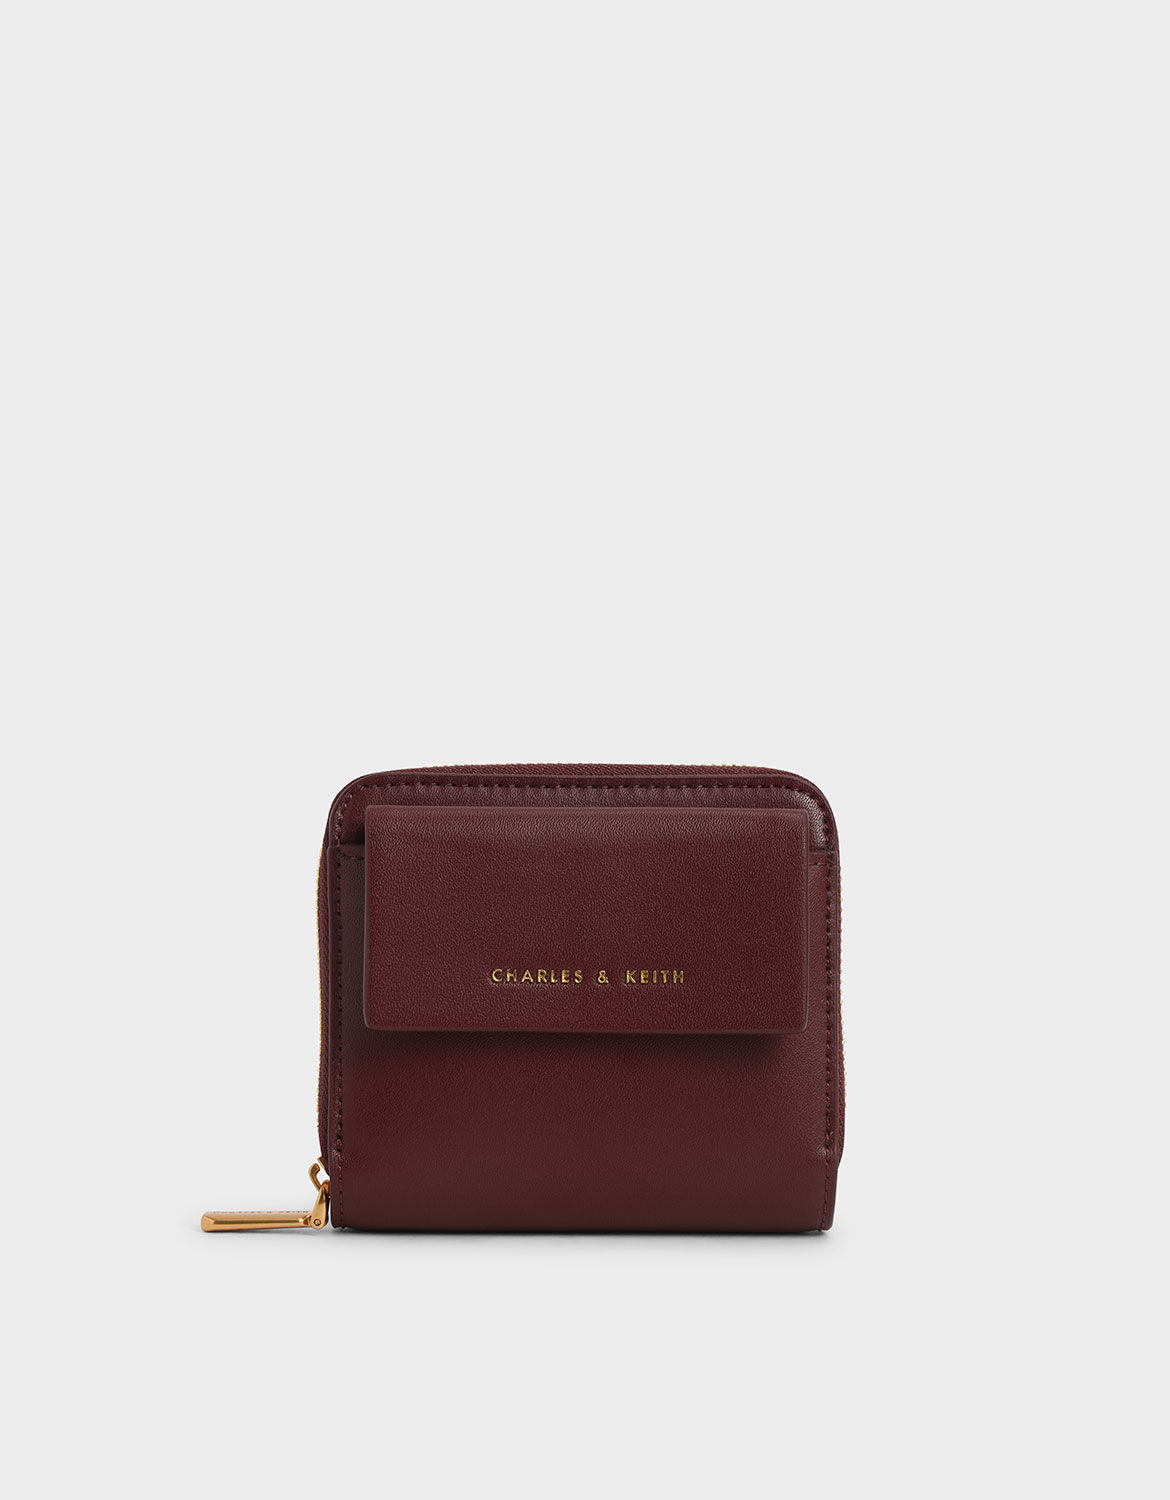 CHARLES & KEITH Faux-Leather Front Metal Logo Zip-Around Mini Wallet for  Women - Burgundy: Buy Online at Best Price in Egypt - Souq is now